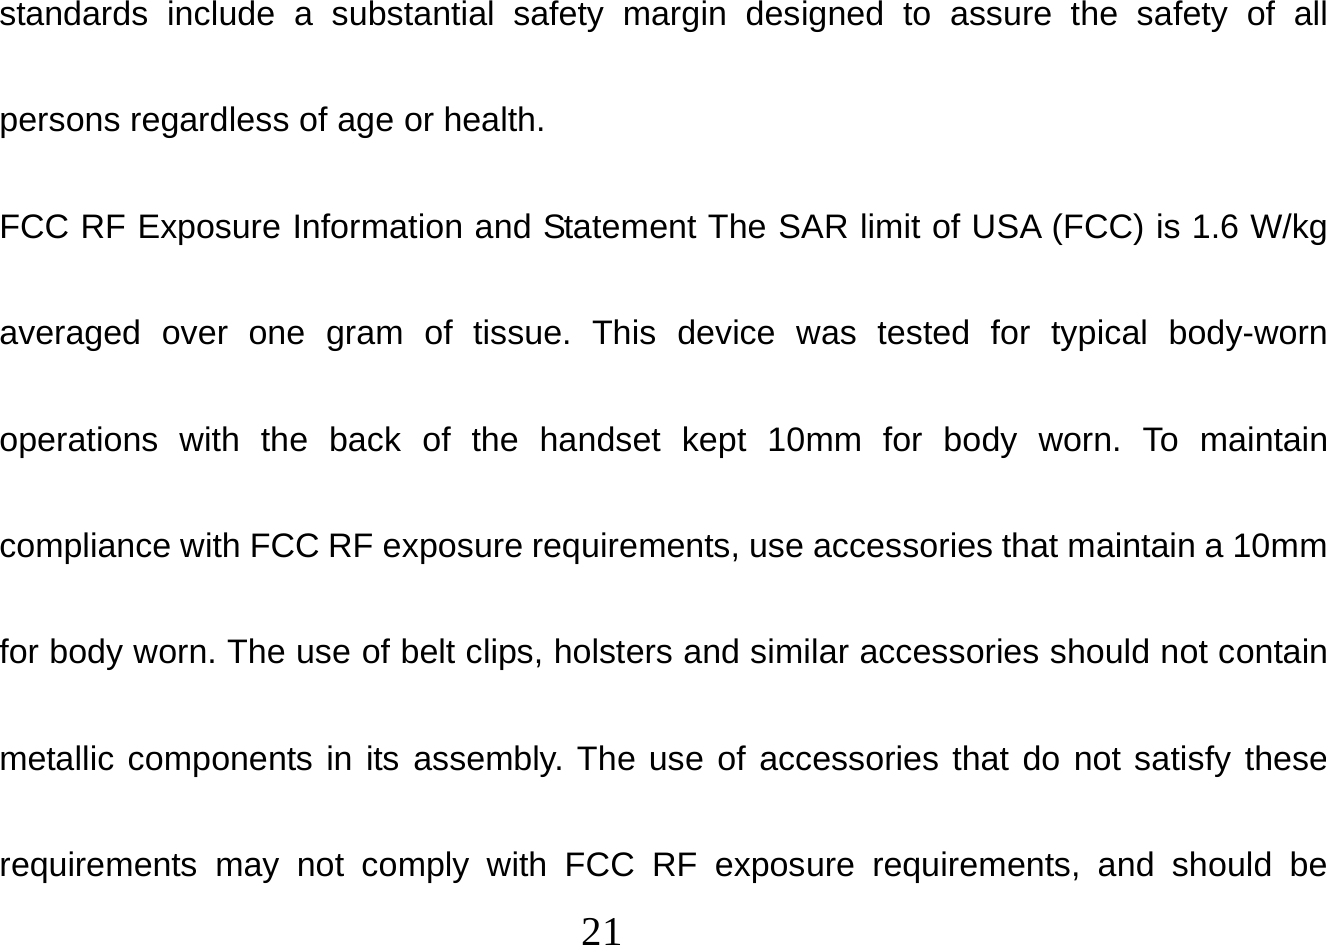  21  standards include a substantial safety margin designed to assure the safety of all persons regardless of age or health. FCC RF Exposure Information and Statement The SAR limit of USA (FCC) is 1.6 W/kg averaged over one gram of tissue. This device was tested for typical body-worn operations with the back of the handset kept 10mm for body worn. To maintain compliance with FCC RF exposure requirements, use accessories that maintain a 10mm for body worn. The use of belt clips, holsters and similar accessories should not contain metallic components in its assembly. The use of accessories that do not satisfy these requirements may not comply with FCC RF exposure requirements, and should be 